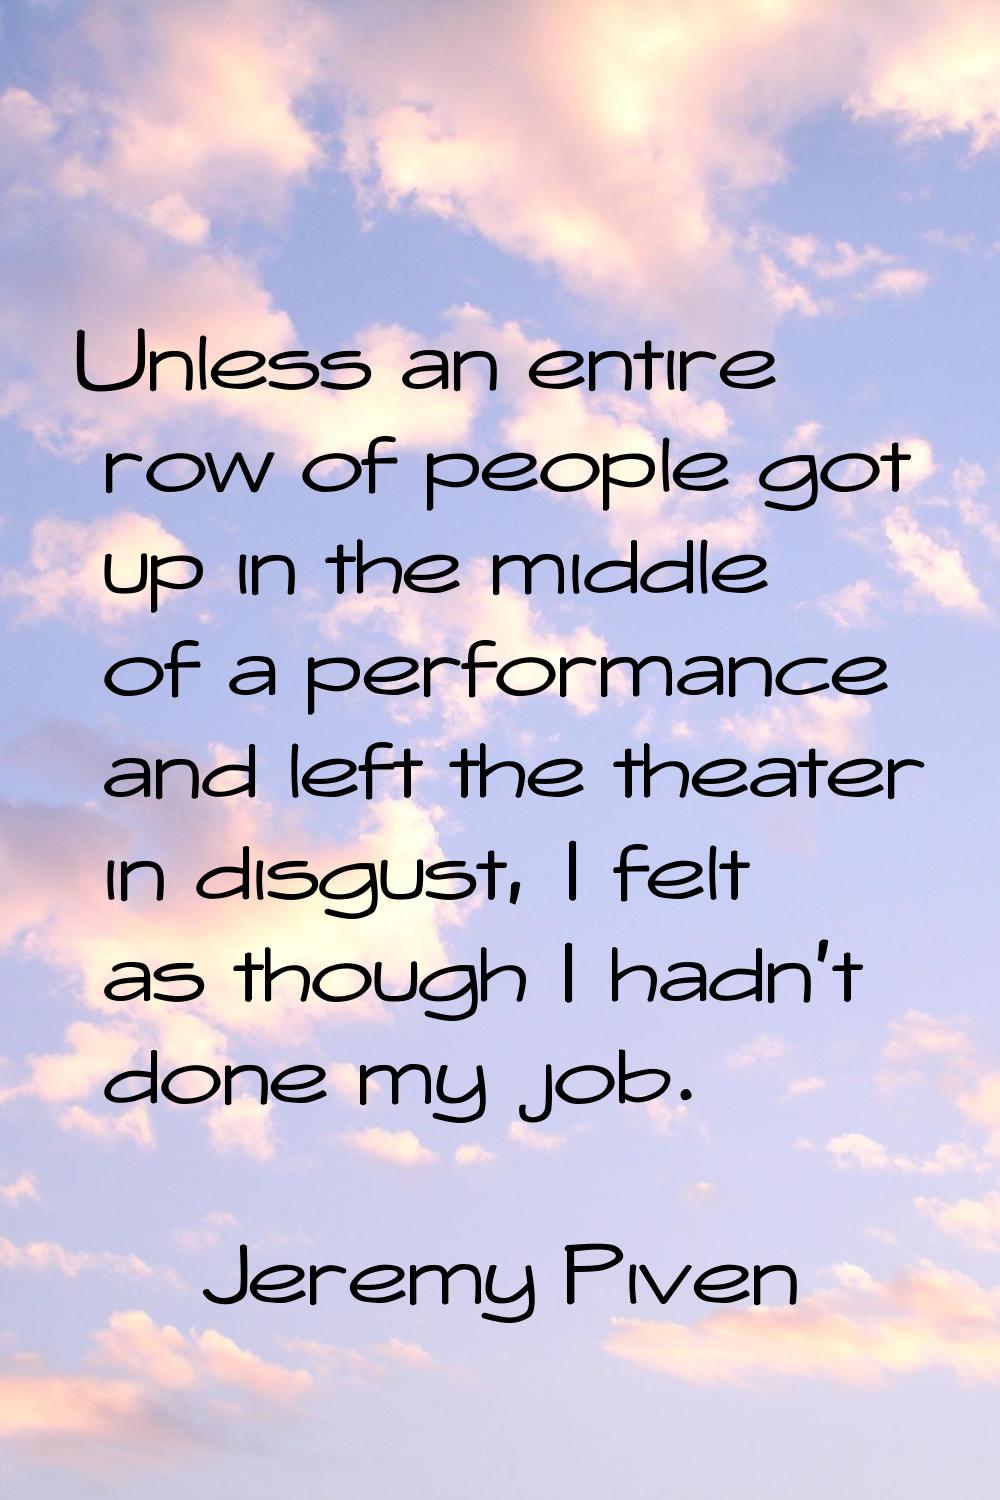 Unless an entire row of people got up in the middle of a performance and left the theater in disgus